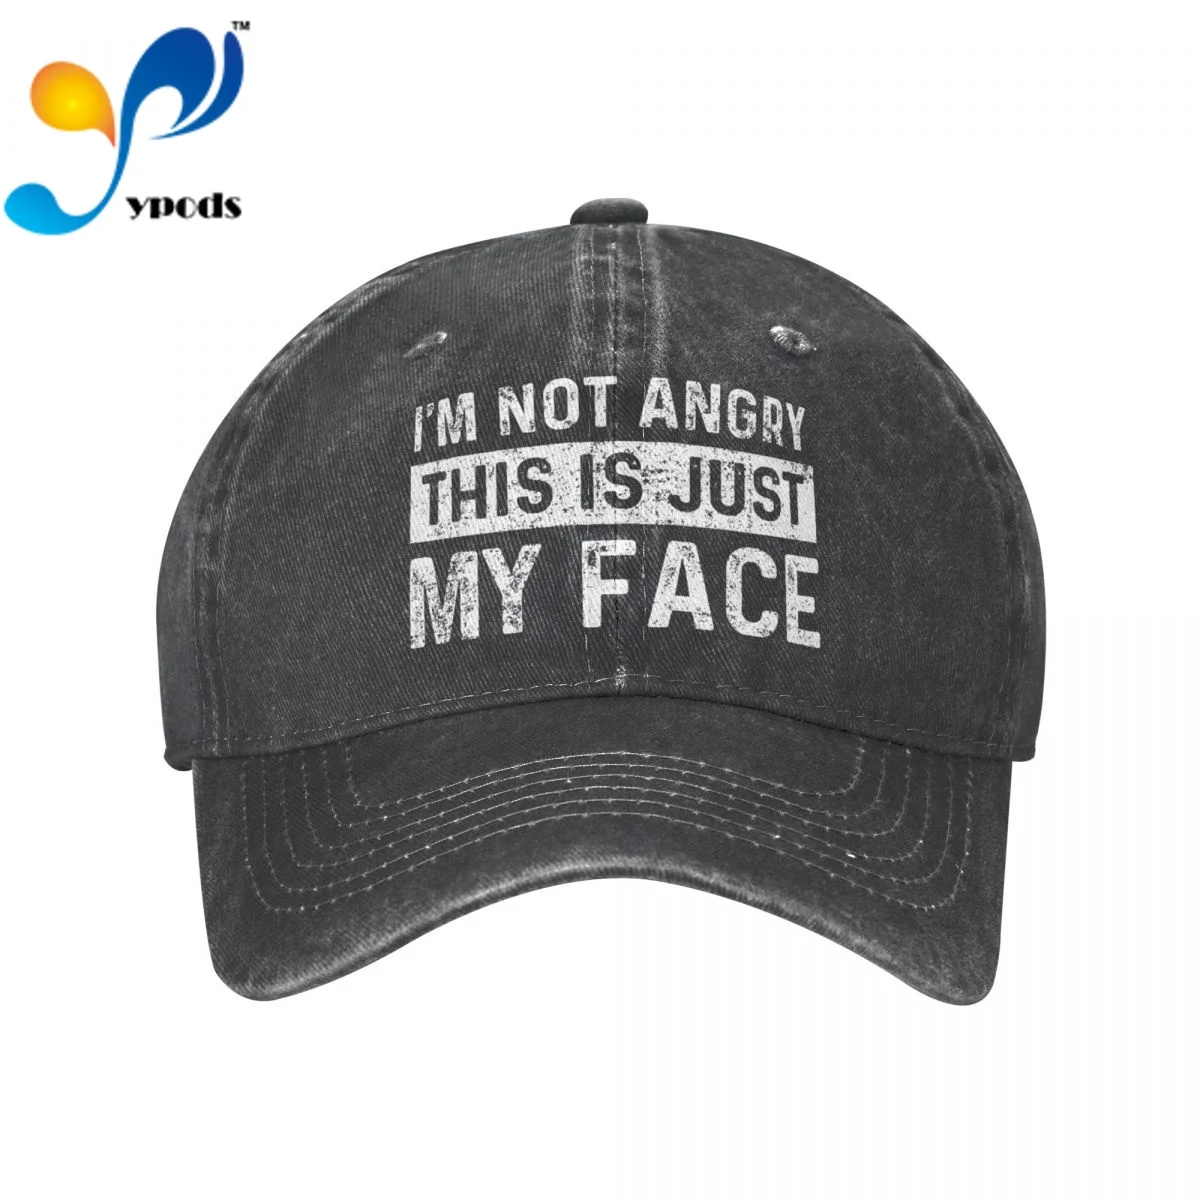 

New Brand Anime I M Not Angry This Is Just My Face Snapback Cap Cotton Baseball Cap Men Women Hip Hop Dad Hat Trucker